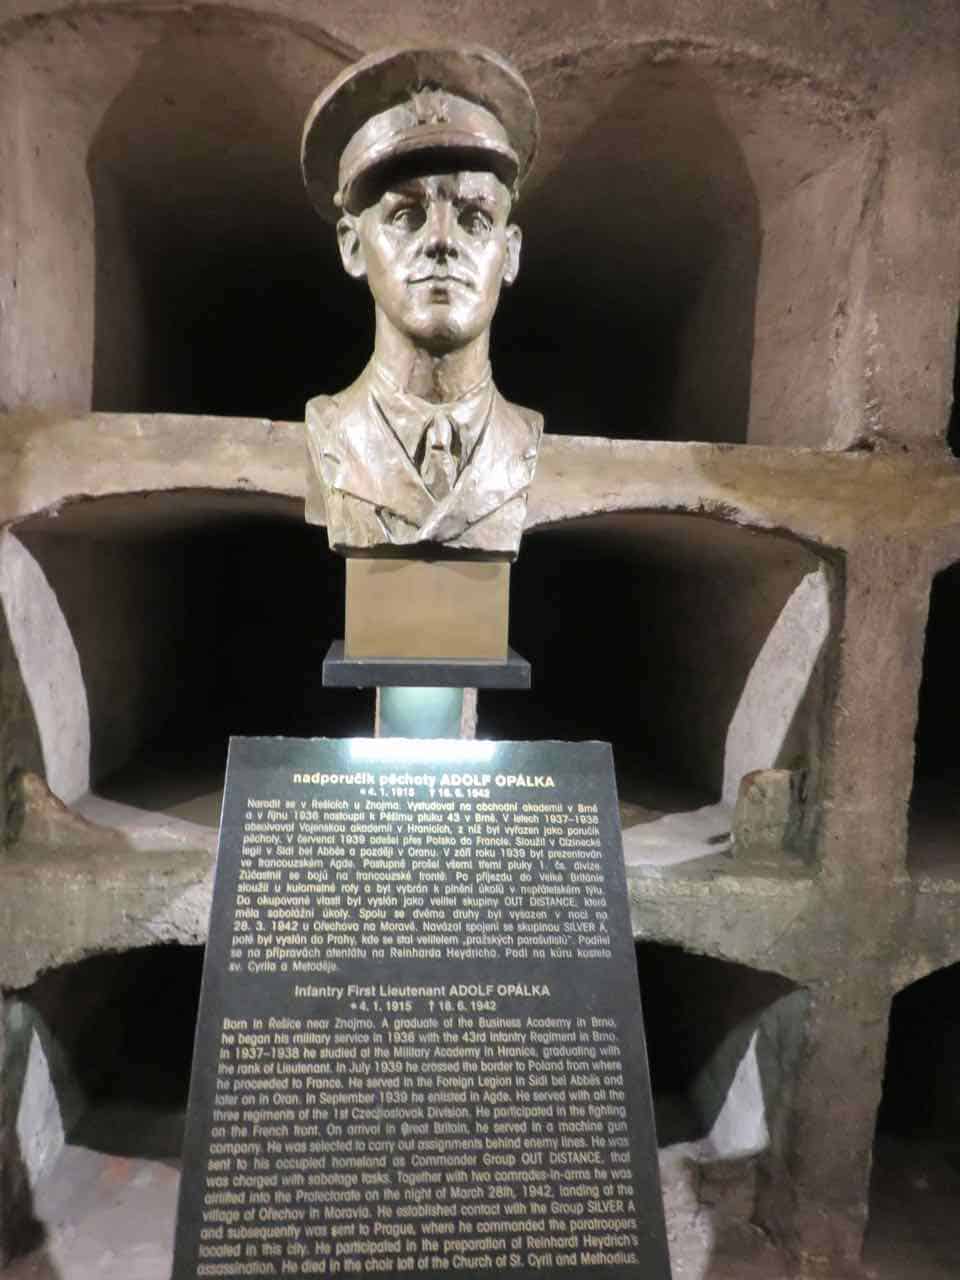 Sculpted bust of a soldier with a plague in front of it.